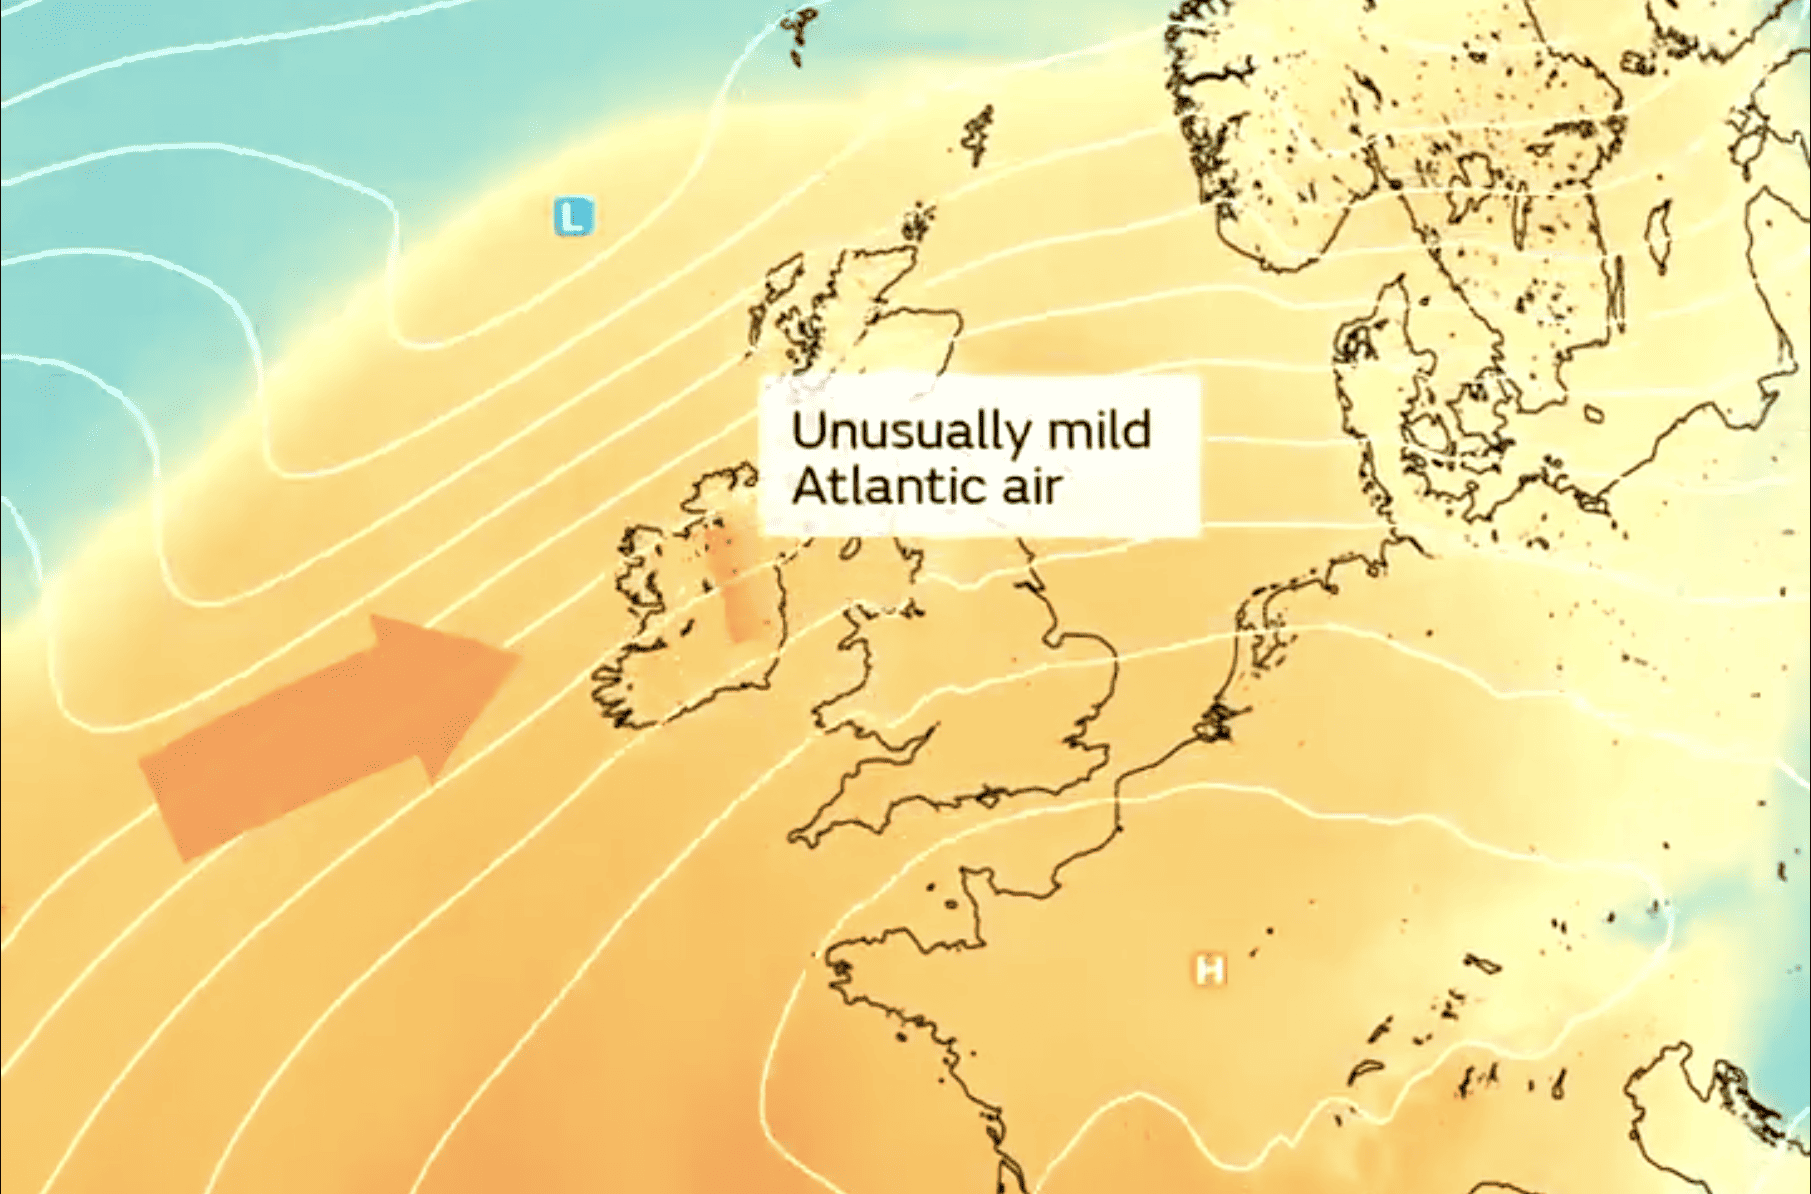 Parts of UK set for record-breaking hot weather this weekend